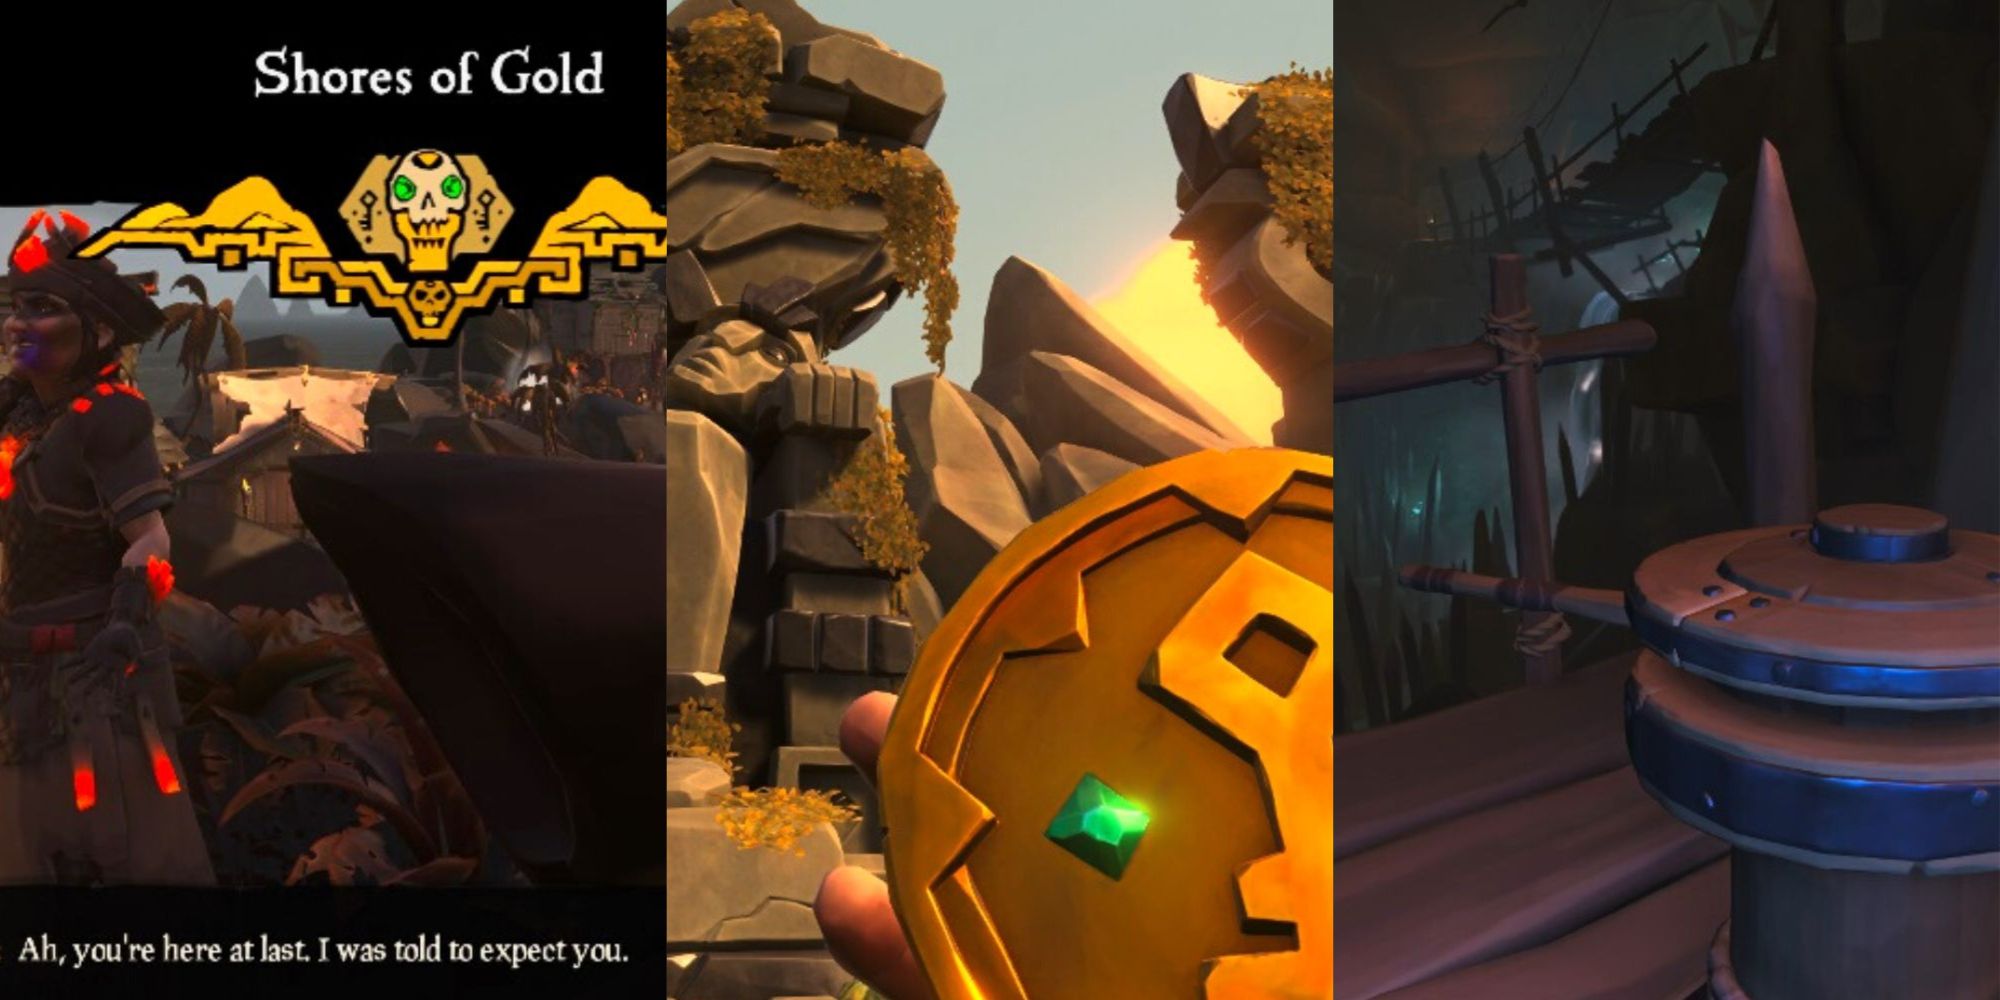 The Shores Of Gold Tall Tale In Sea Of Thieves Including Grace, The Gold Hoarder's Coin, And Traps